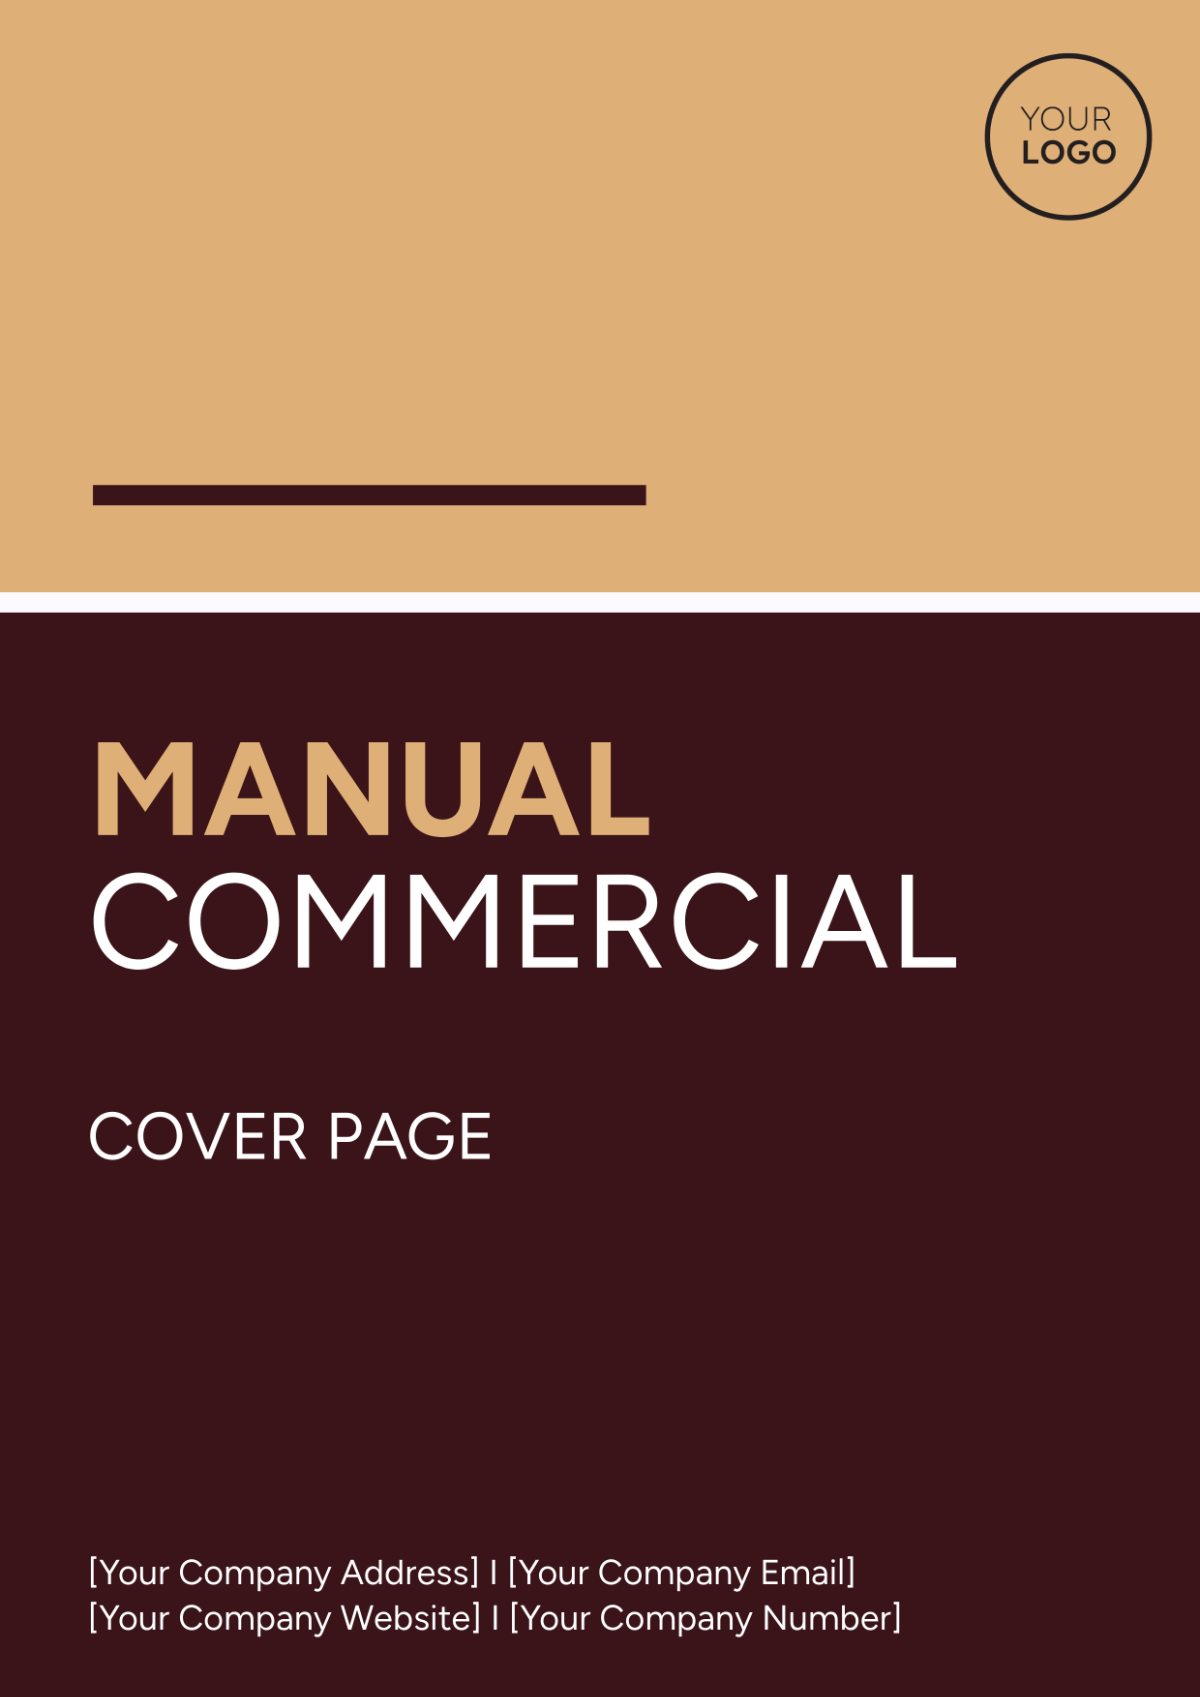 Manual Commercial Cover Page